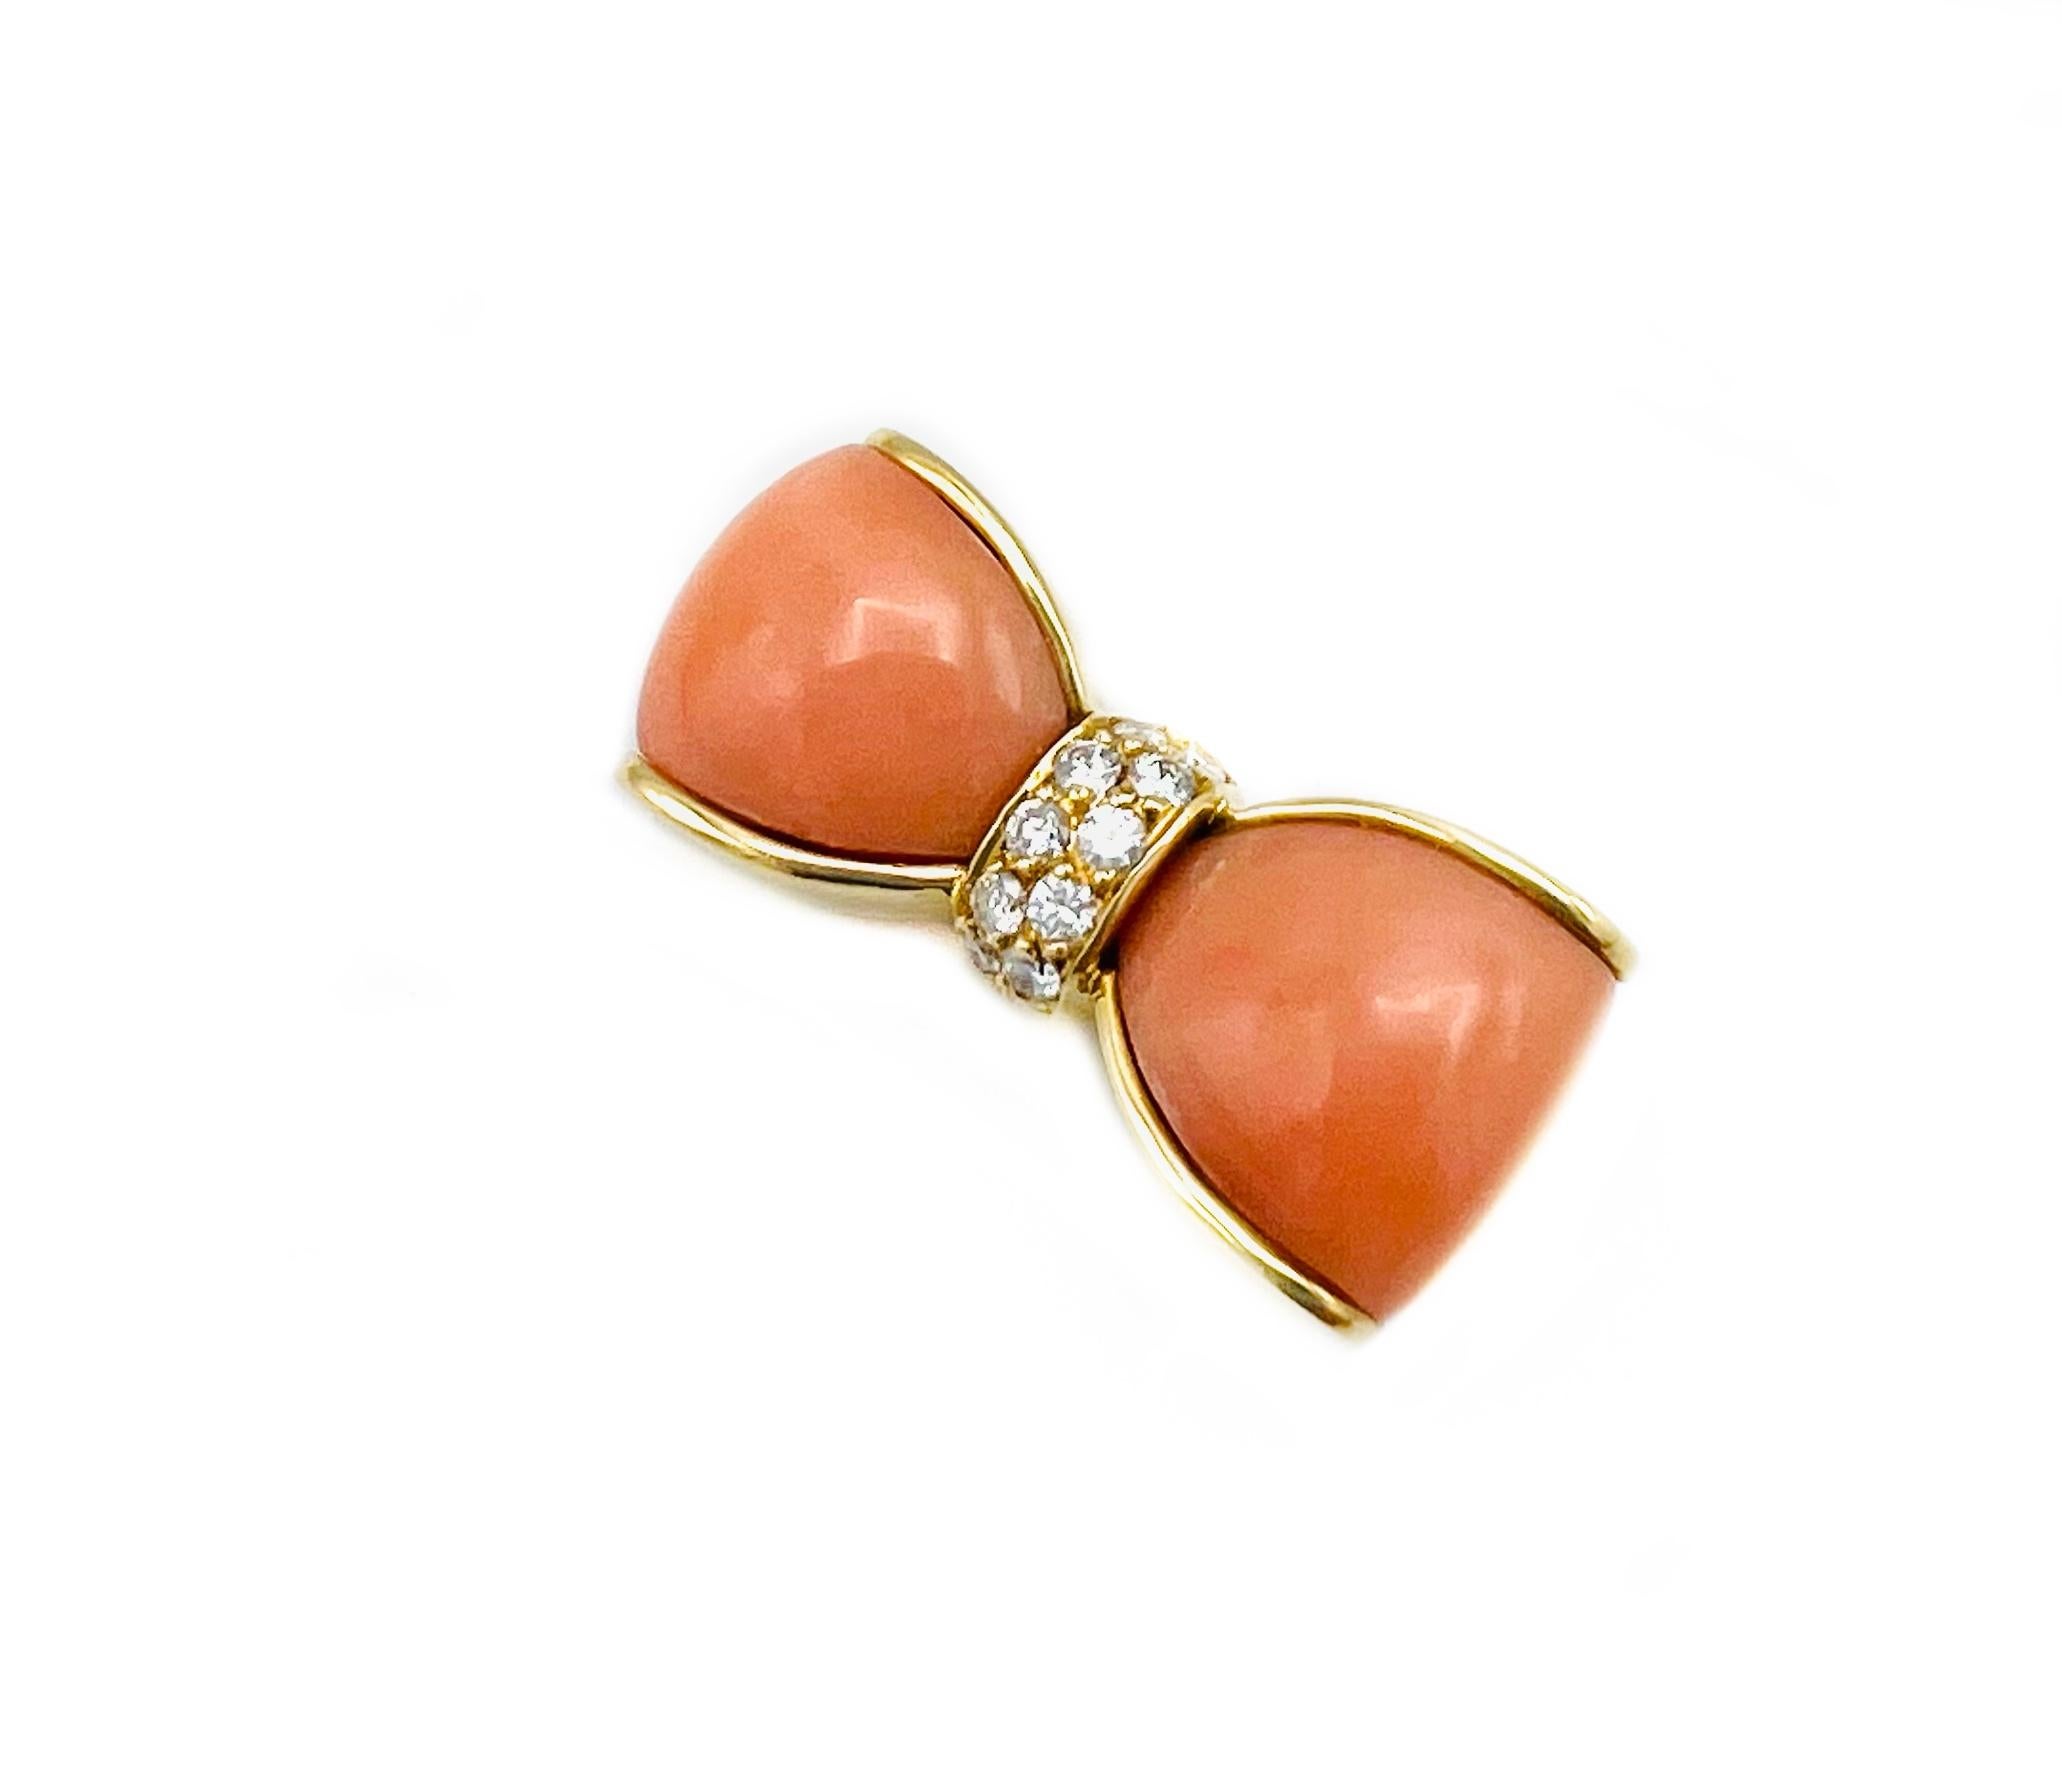 Product details:

The brooch is made out of Mediterranean coral and 0.19 carats of round brilliant cut diamond, set in 18K yellow gold. Made in France.

Hallmarks: eagle head, VCA, 18K, serial number B1327K19, 0.19
Measurement: 1” x 0.25” x